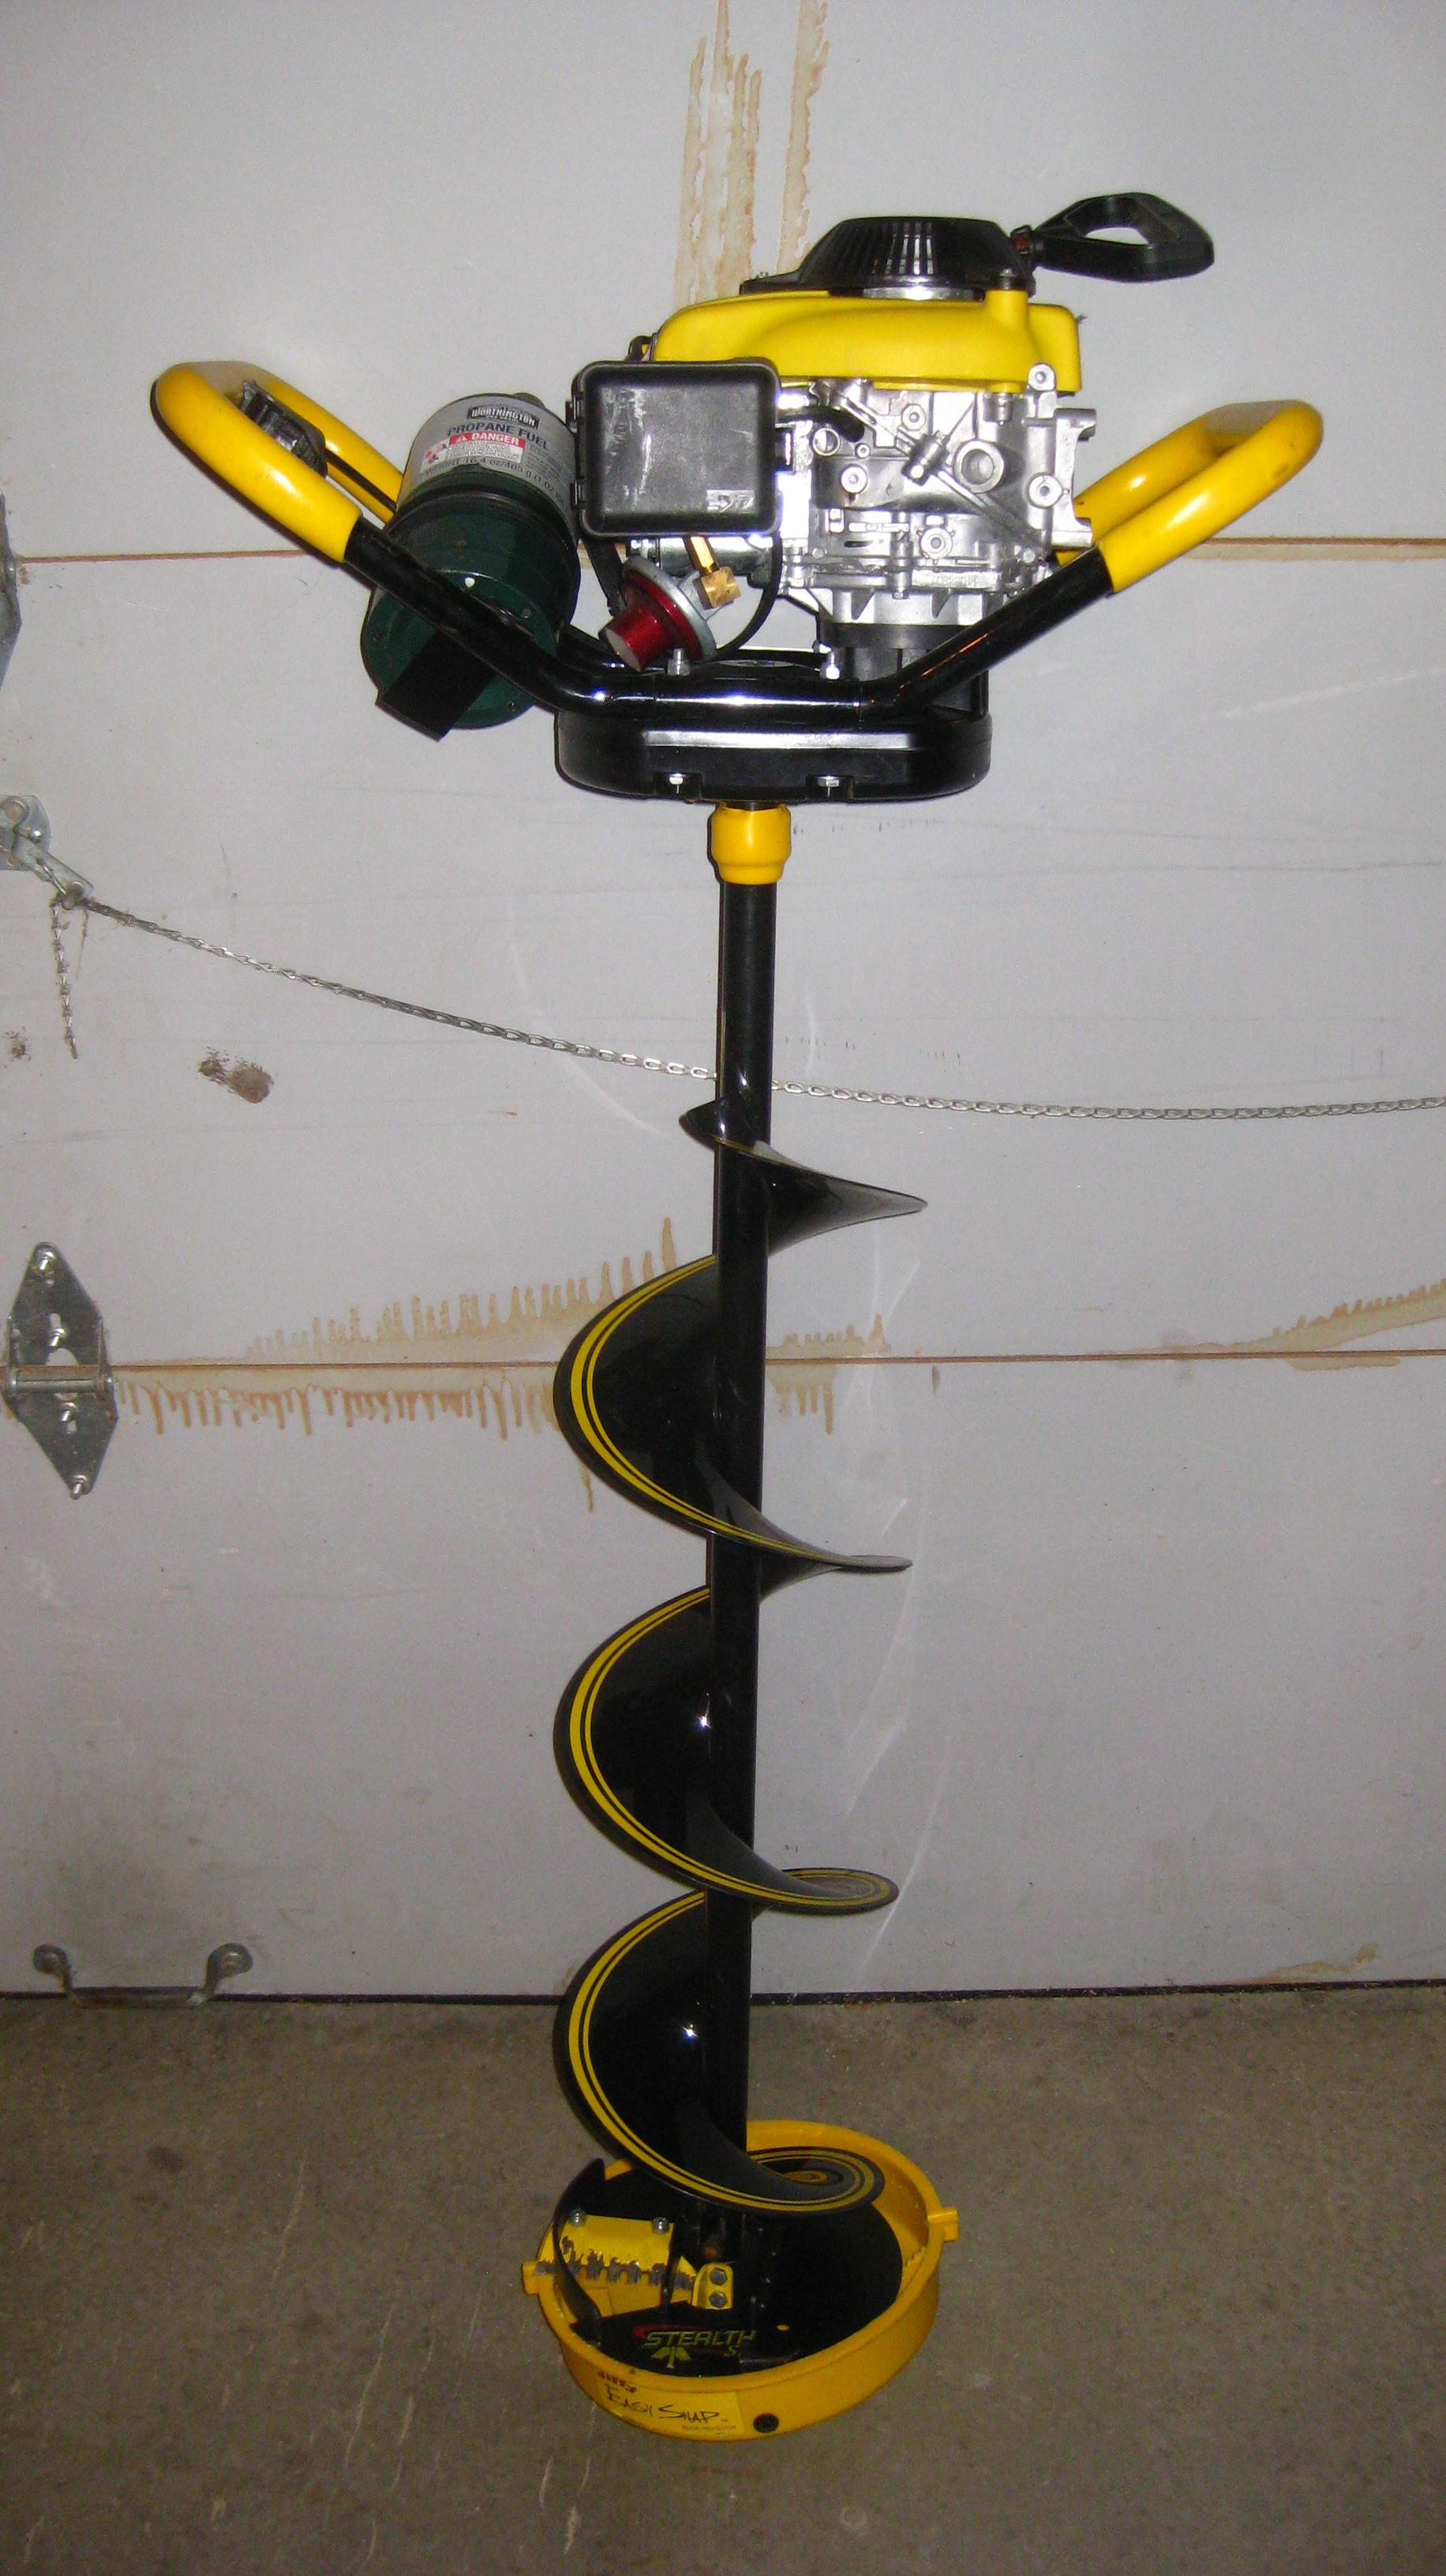 For Sale: 10 Jiffy Pro 4 Propane Ice Auger - FREE LISTING-FOR